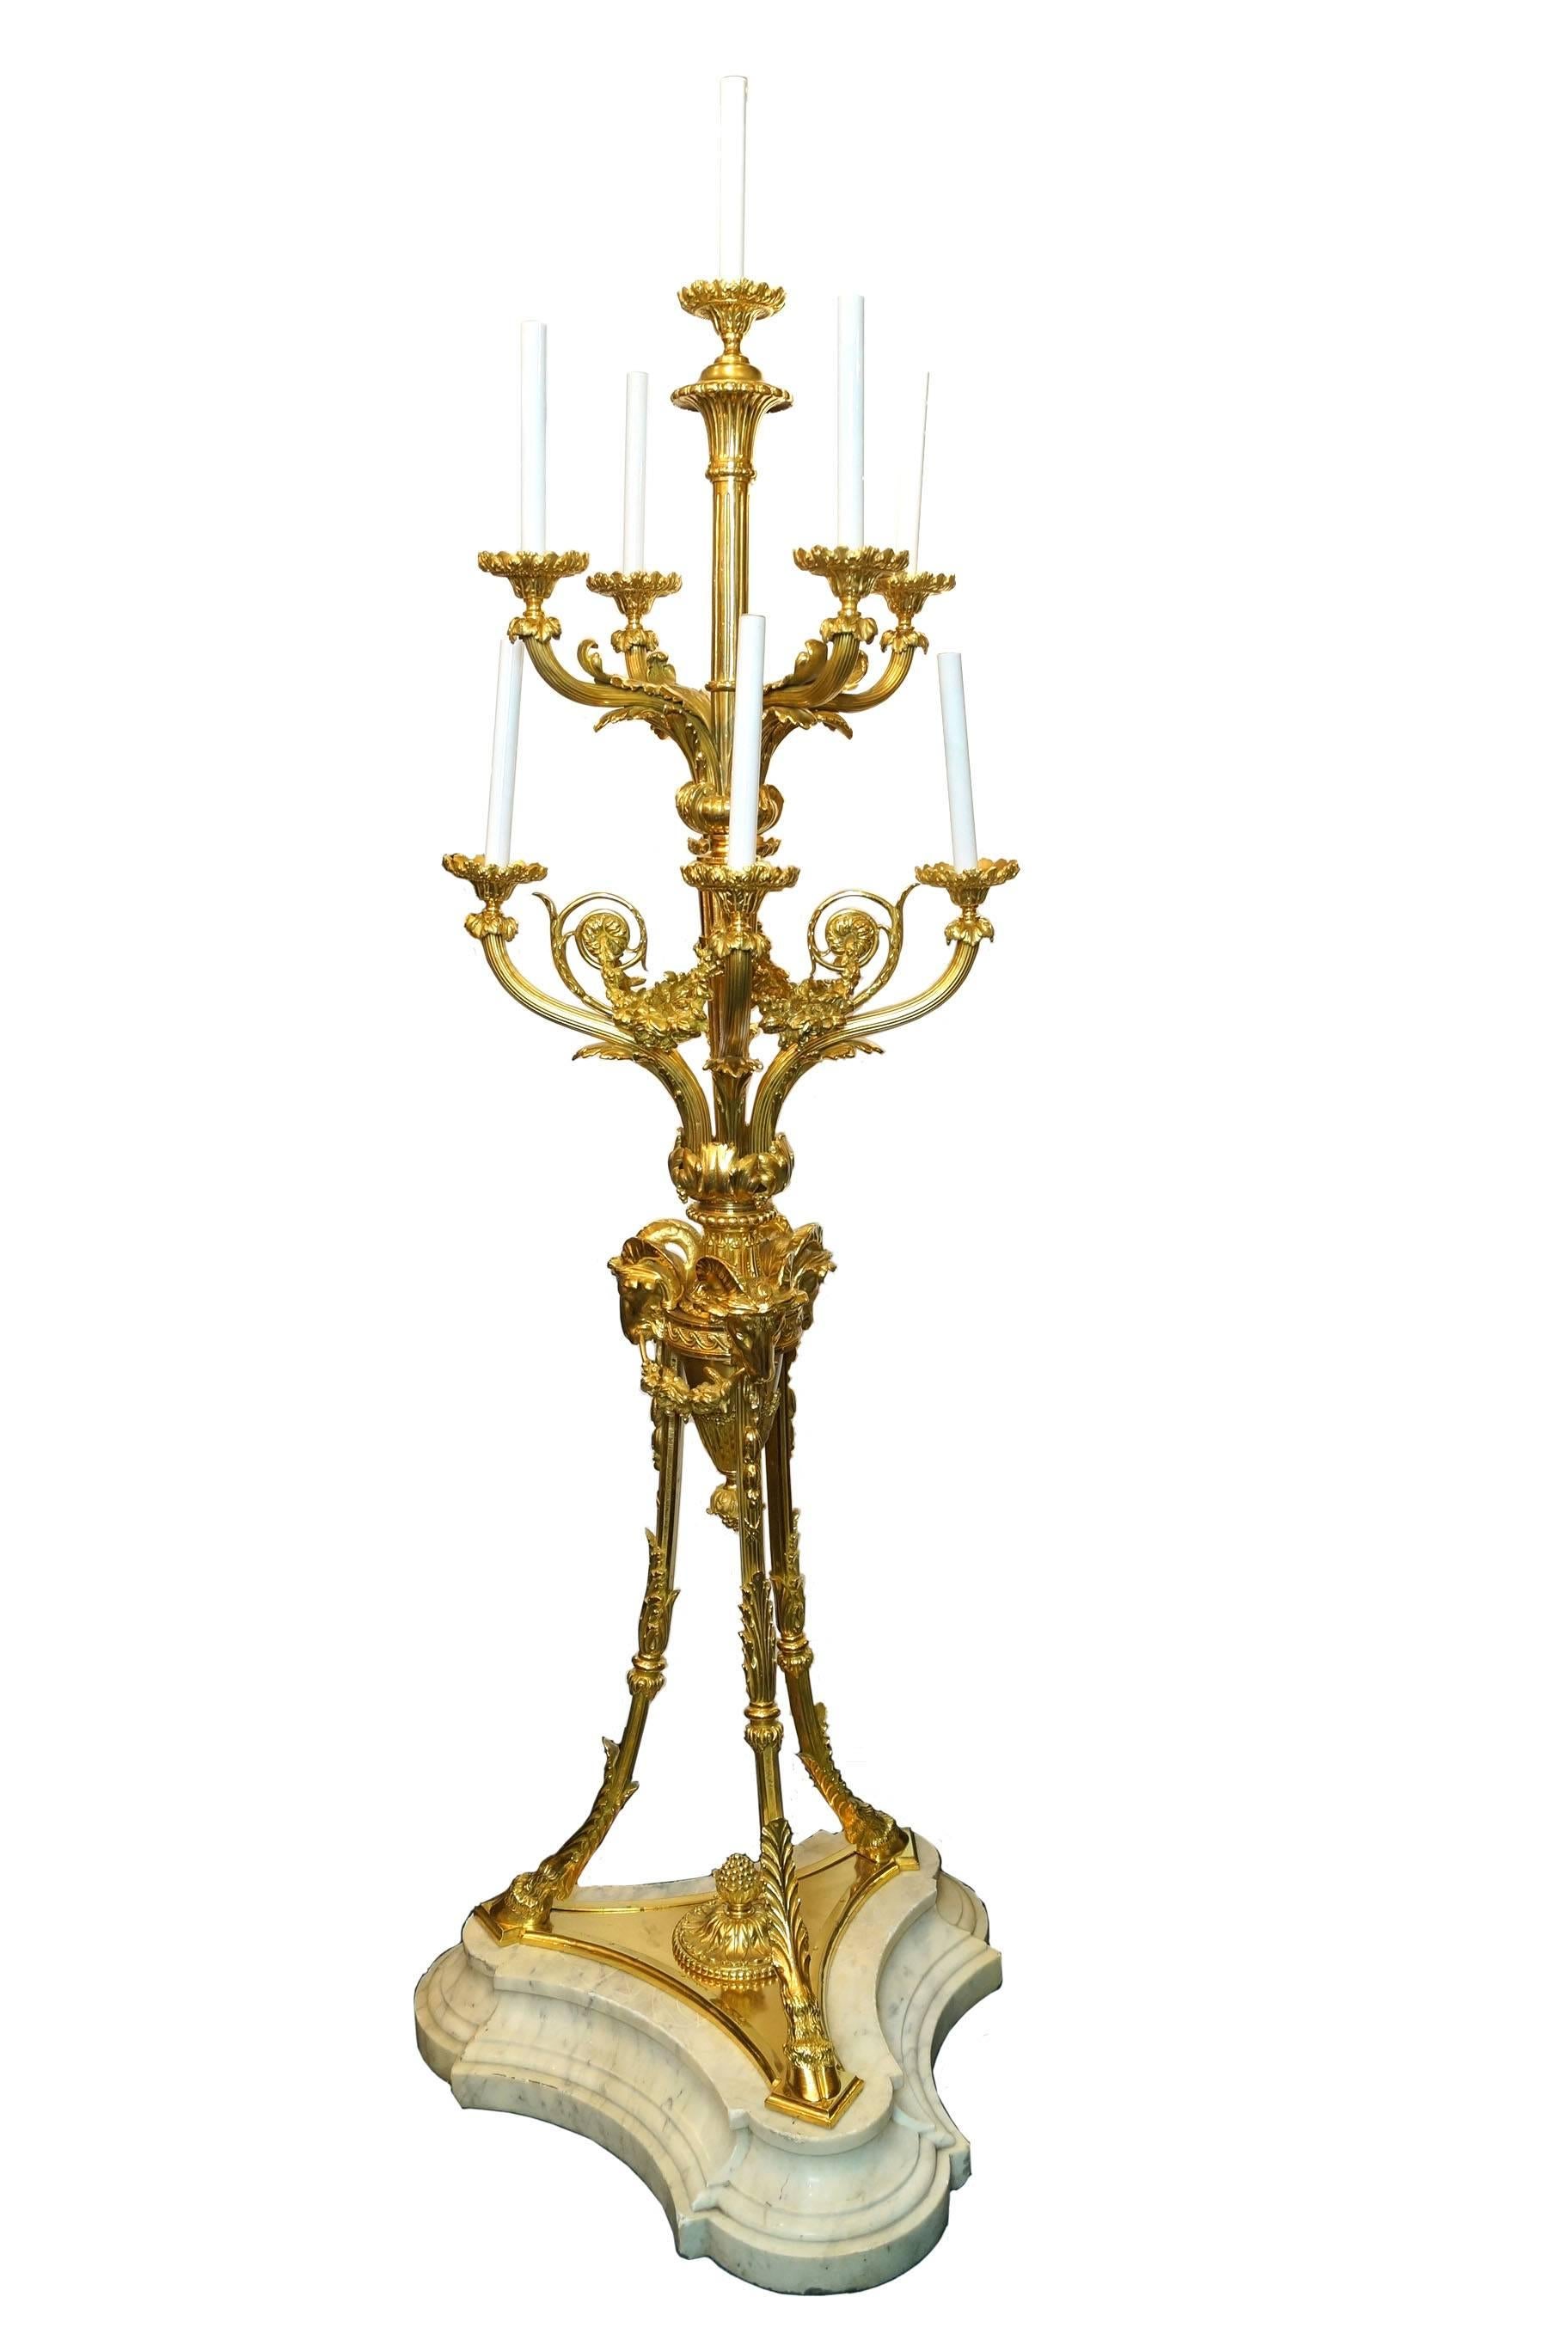 Pair of French Louis XVI style gilt bronze and marble nine-light torcher candelabra with Rams Head and Garlands.

Stock number: L404.